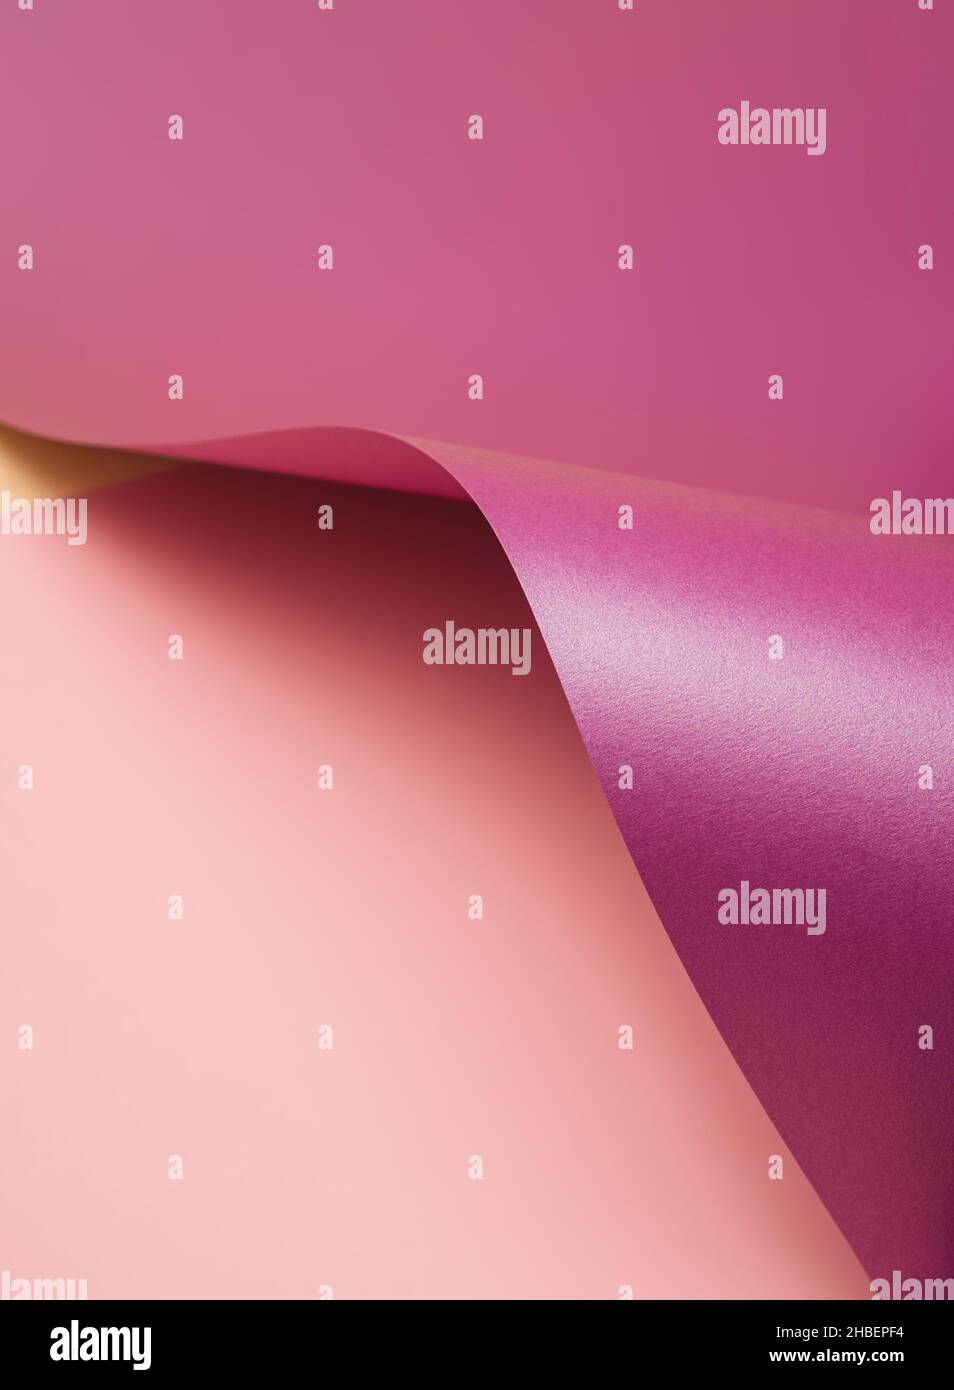 Violet wawy sheet of paper on a pastel pink background. Abstract vibrant background Stock Photo